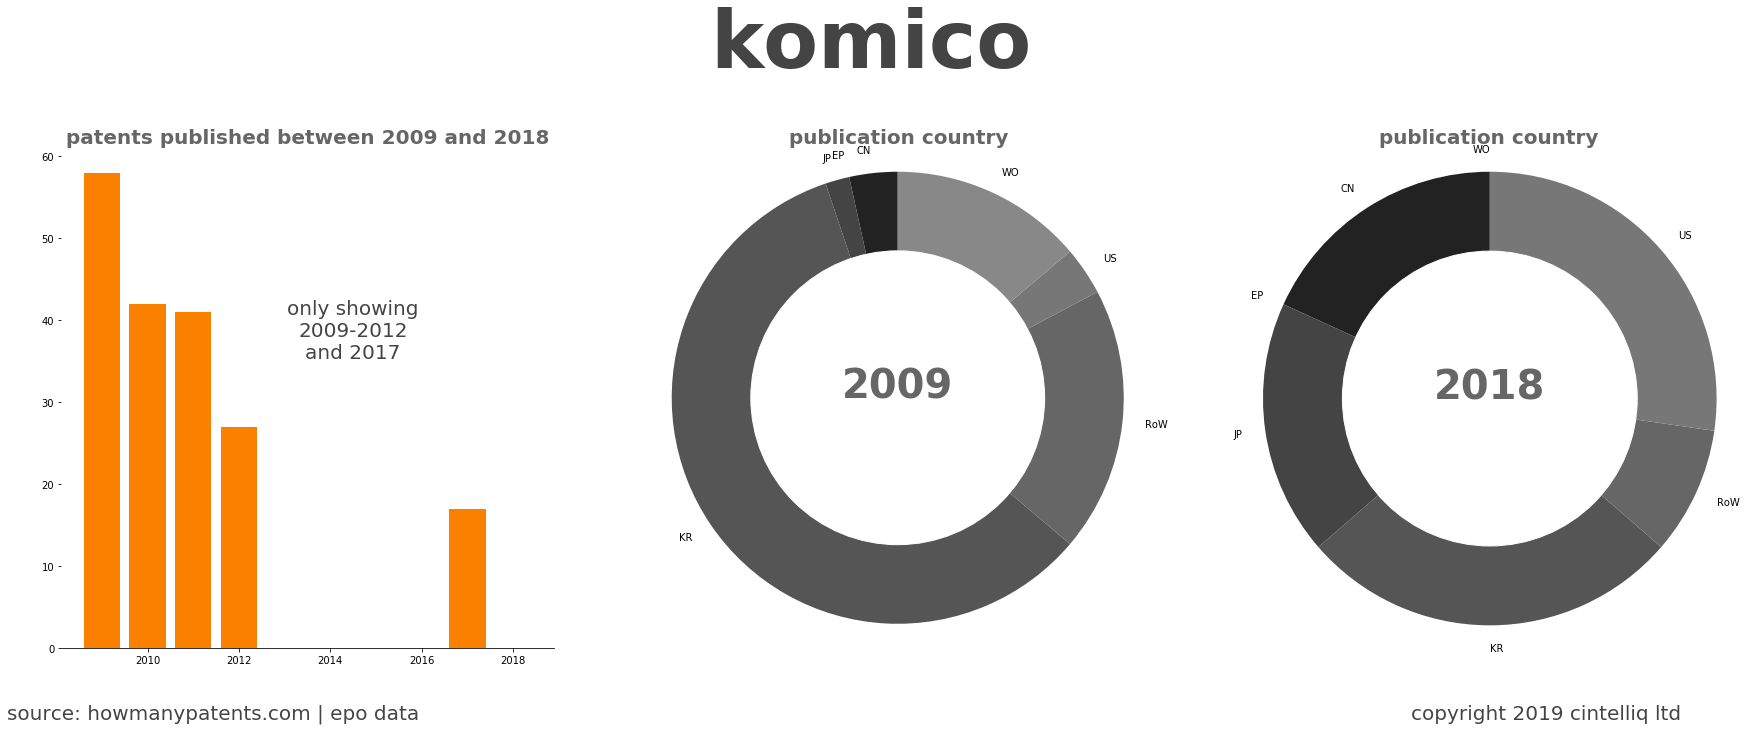 summary of patents for Komico